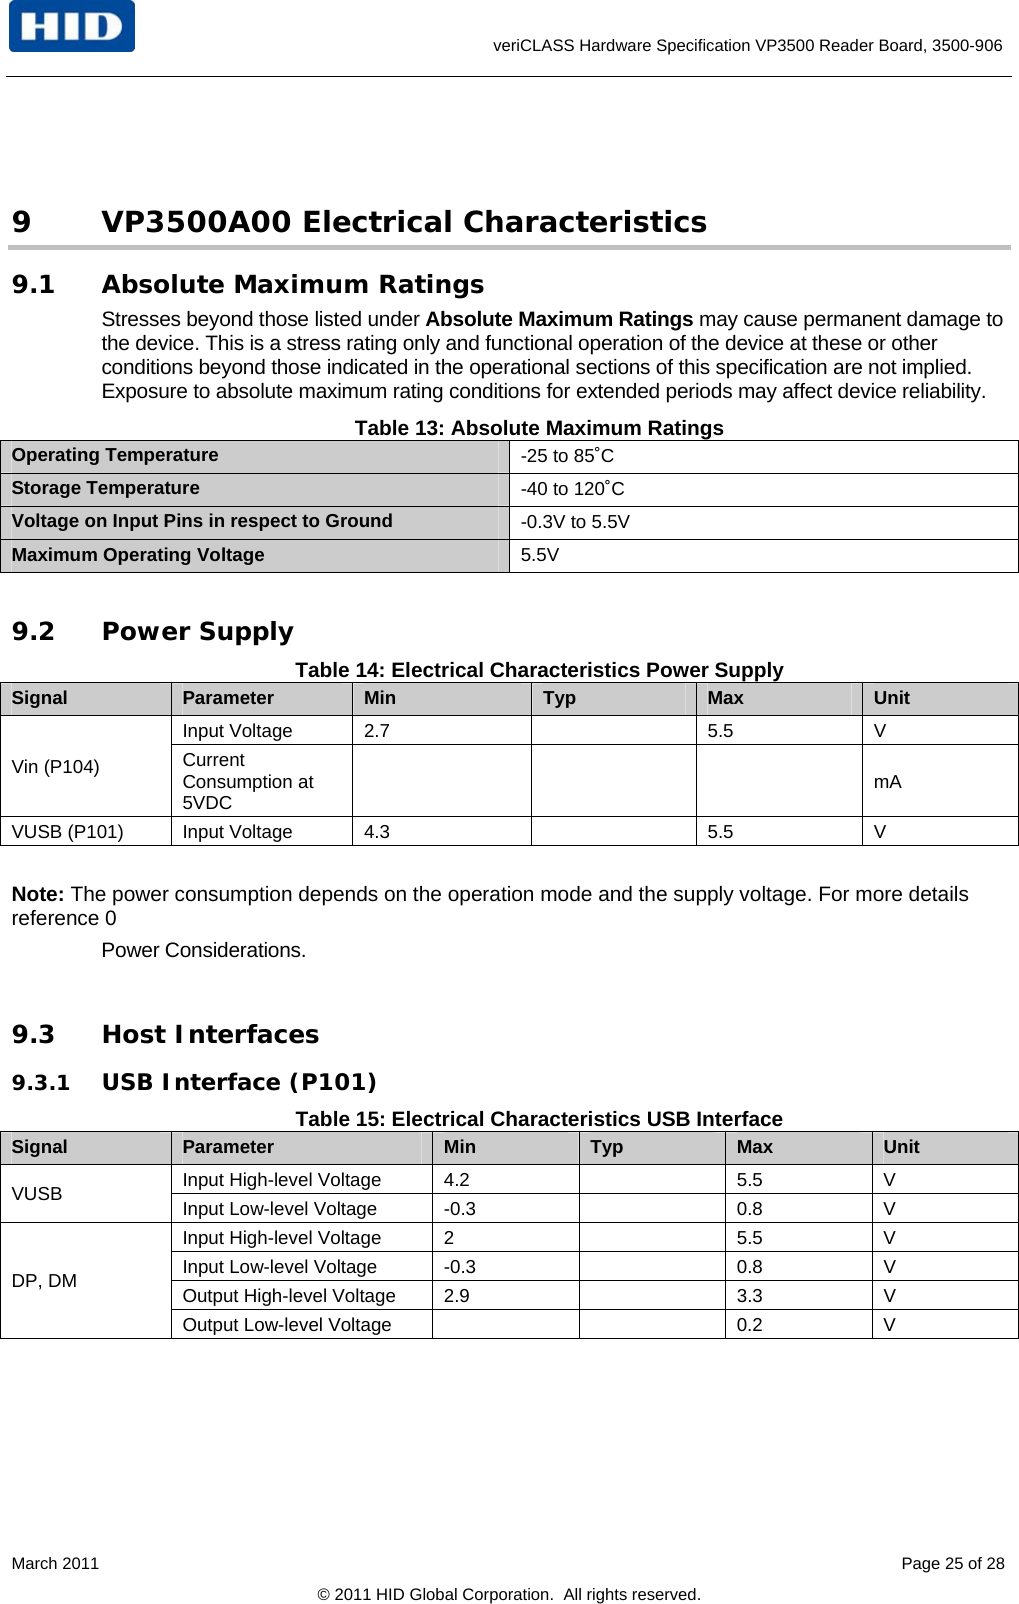      veriCLASS Hardware Specification VP3500 Reader Board, 3500-906  9 VP3500A00 Electrical Characteristics 9.1 Absolute Maximum Ratings Stresses beyond those listed under Absolute Maximum Ratings may cause permanent damage to the device. This is a stress rating only and functional operation of the device at these or other conditions beyond those indicated in the operational sections of this specification are not implied. Exposure to absolute maximum rating conditions for extended periods may affect device reliability. Table 13: Absolute Maximum Ratings Operating Temperature  -25 to 85˚C Storage Temperature  -40 to 120˚C Voltage on Input Pins in respect to Ground  -0.3V to 5.5V Maximum Operating Voltage  5.5V  9.2 Power Supply Table 14: Electrical Characteristics Power Supply Signal  Parameter  Min  Typ  Max  Unit Input Voltage  2.7    5.5  V Vin (P104)  Current Consumption at 5VDC     mA VUSB (P101)  Input Voltage  4.3    5.5  V  Note: The power consumption depends on the operation mode and the supply voltage. For more details reference 0  Power Considerations.  9.3 Host Interfaces 9.3.1 USB Interface (P101) Table 15: Electrical Characteristics USB Interface Signal  Parameter  Min  Typ  Max  Unit Input High-level Voltage  4.2    5.5  V VUSB  Input Low-level Voltage  -0.3    0.8  V Input High-level Voltage  2    5.5  V Input Low-level Voltage  -0.3    0.8  V Output High-level Voltage  2.9    3.3  V DP, DM Output Low-level Voltage      0.2  V March 2011    Page 25 of 28 © 2011 HID Global Corporation.  All rights reserved. 